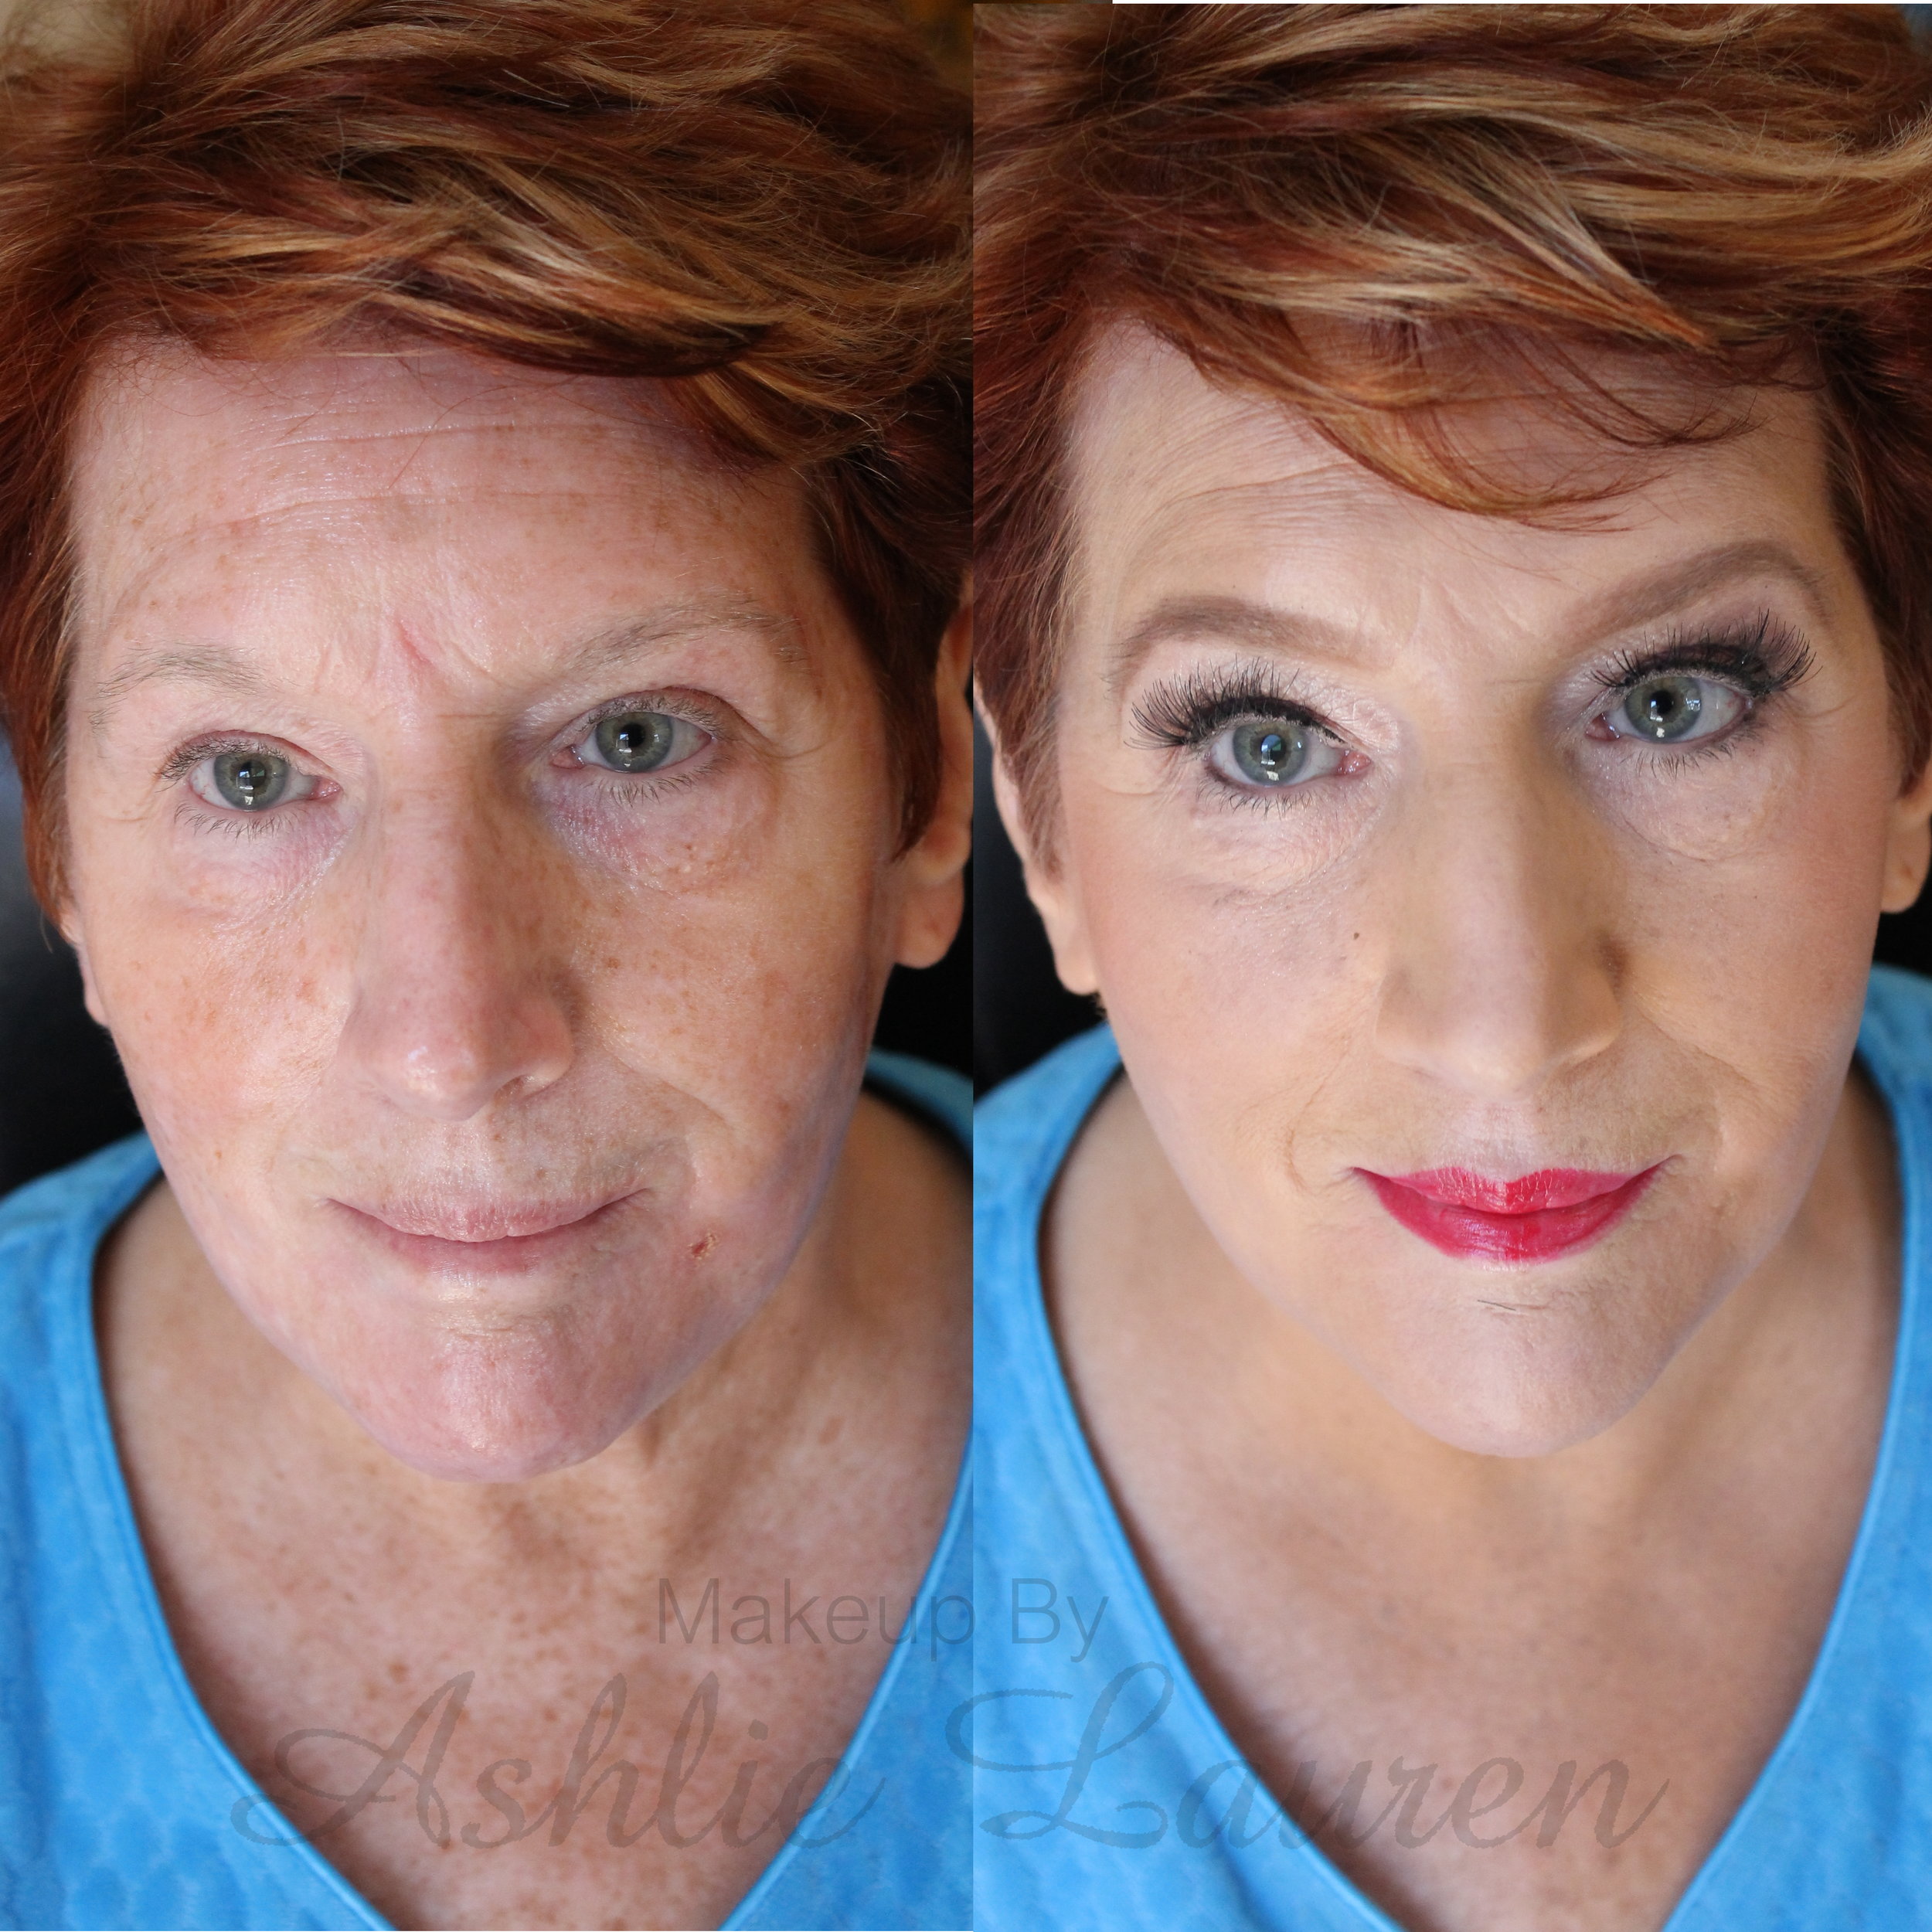 before and after transformation makeup by Ashlie Lauren glamour studio 17.jpg